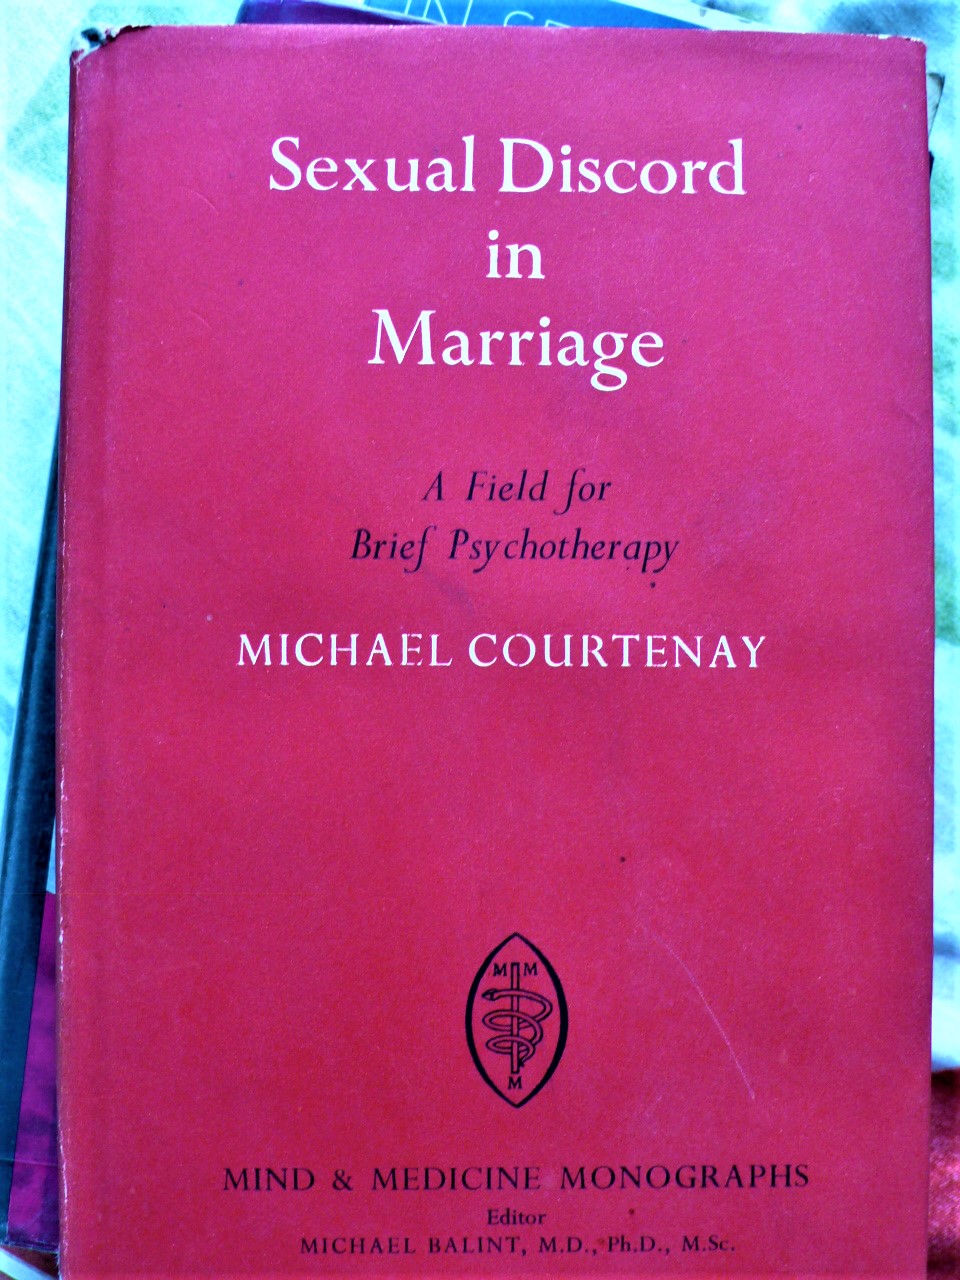 sexual discord in marriage:  a field for brief psychotherapy